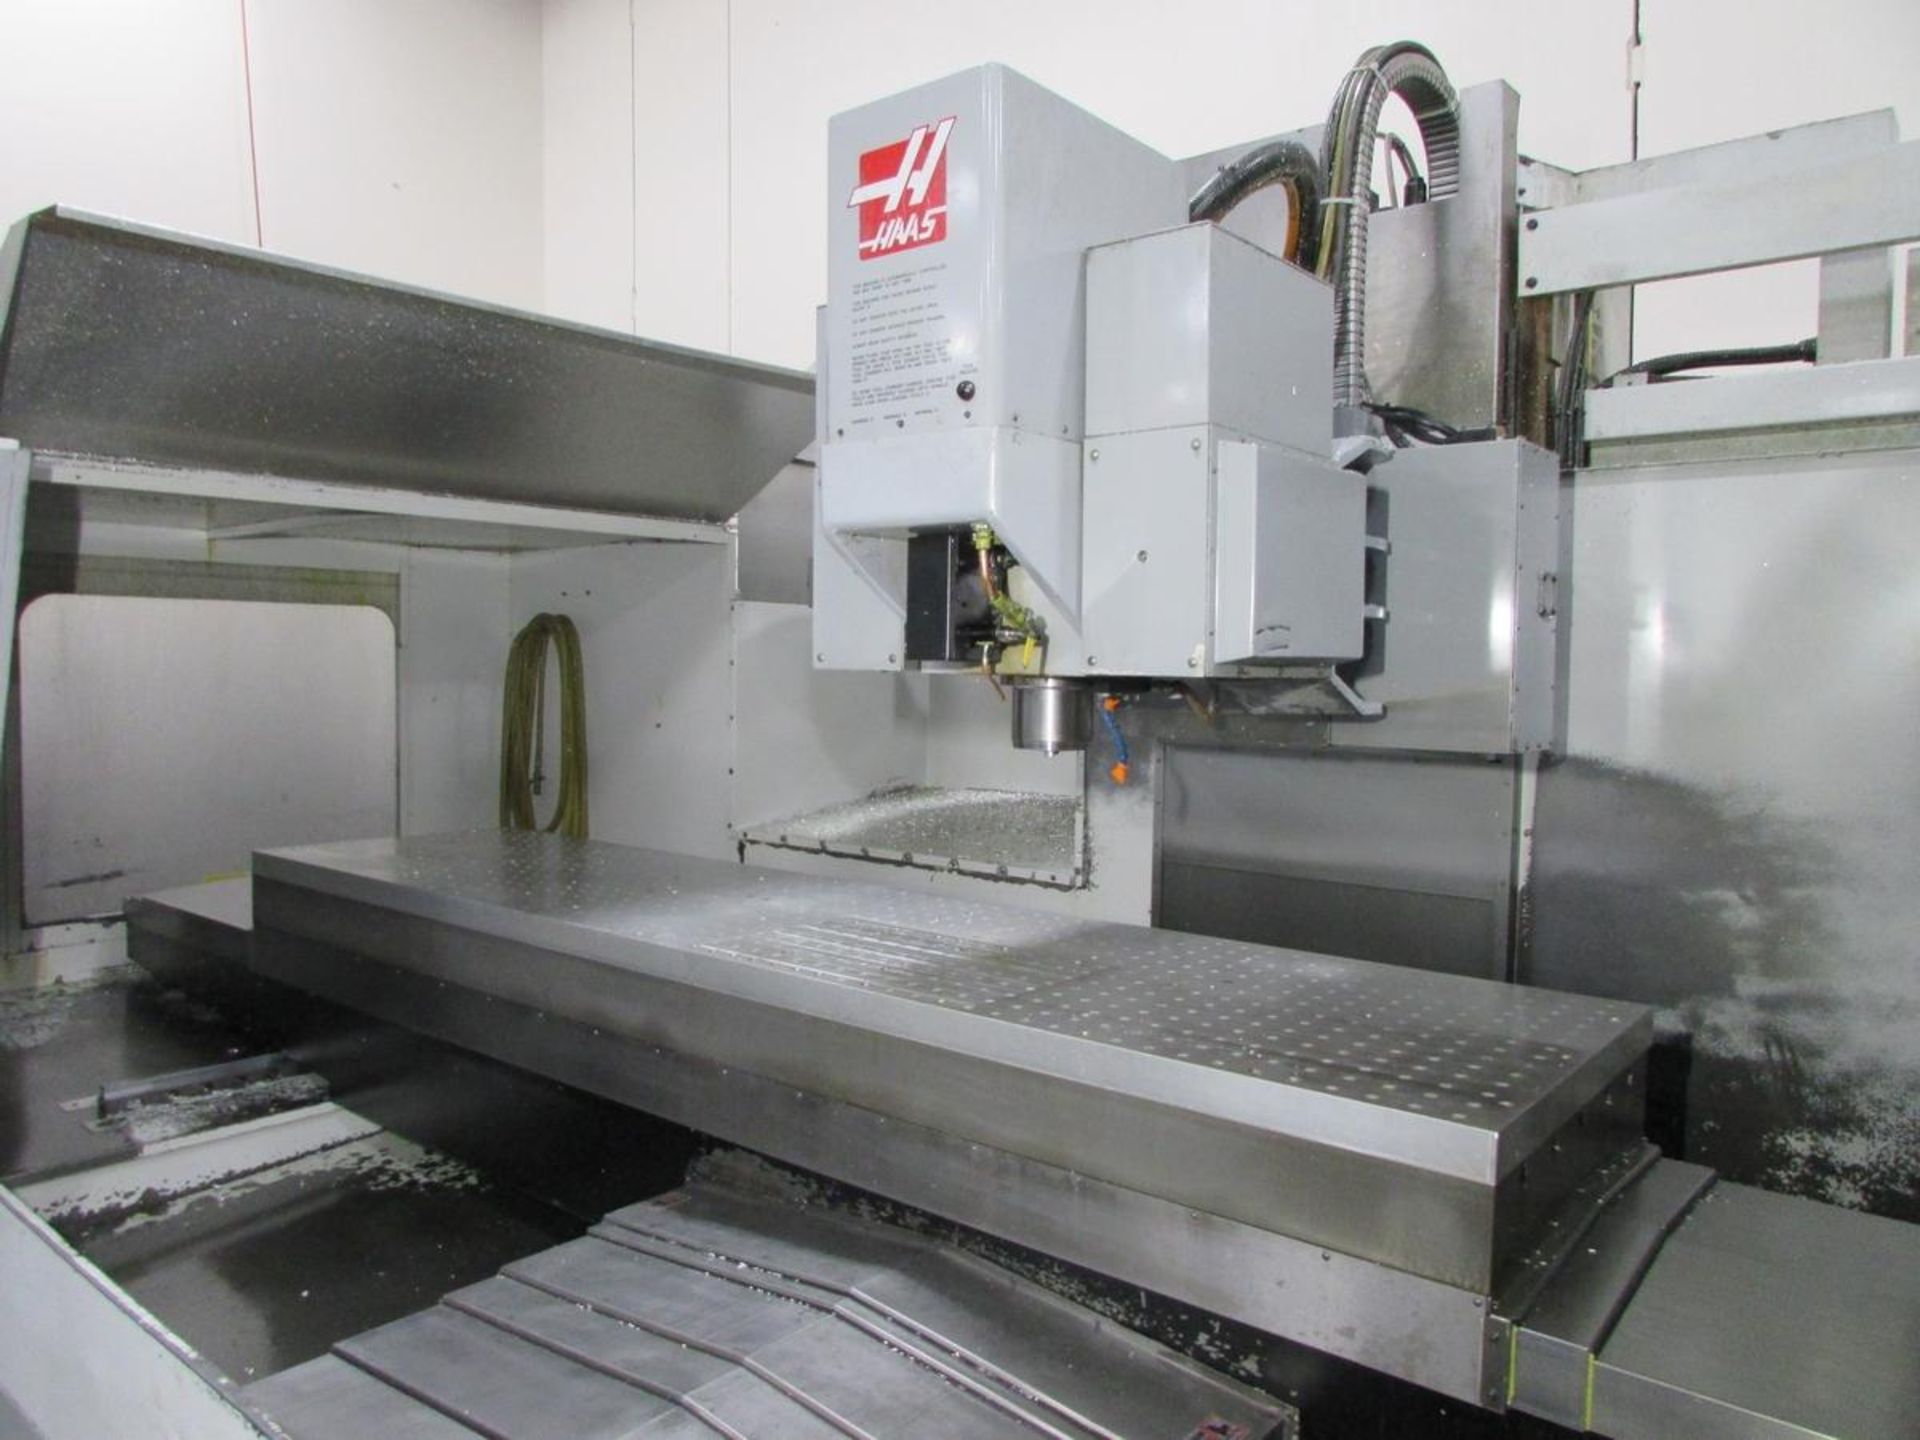 1997 Haas VR-11 5-Axis CNC Vertical Maching Center - Image 6 of 30